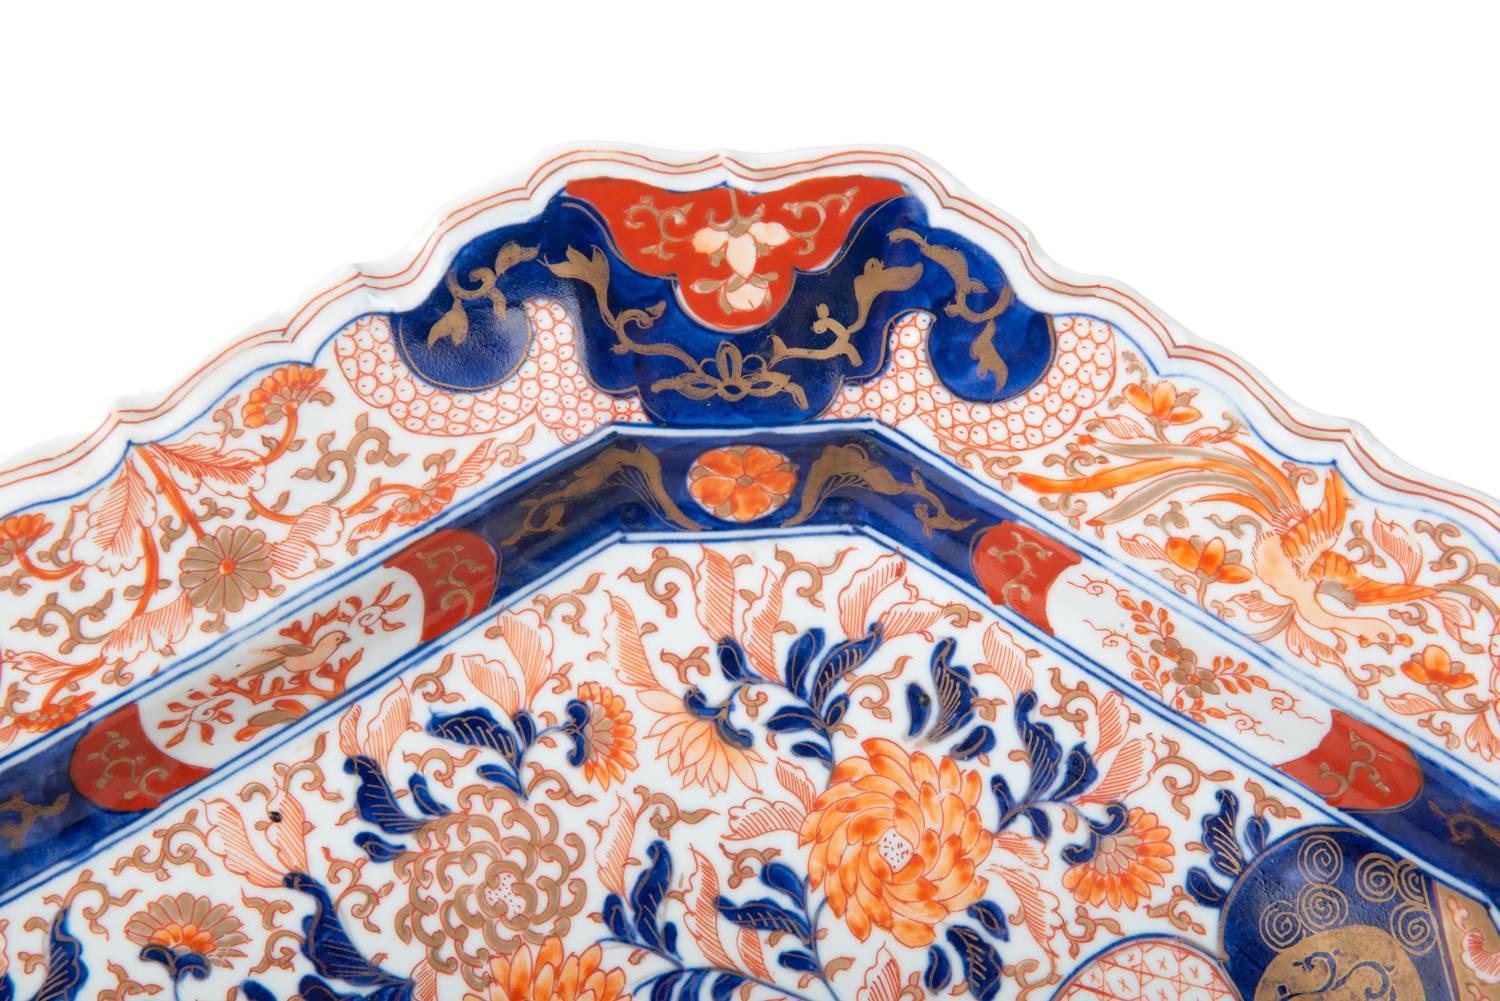 A good quality 19th century Japanese Imari charge, hexagonal in shape, having the classical blue and orange colors. Depicting flower and motif decoration to the whole.